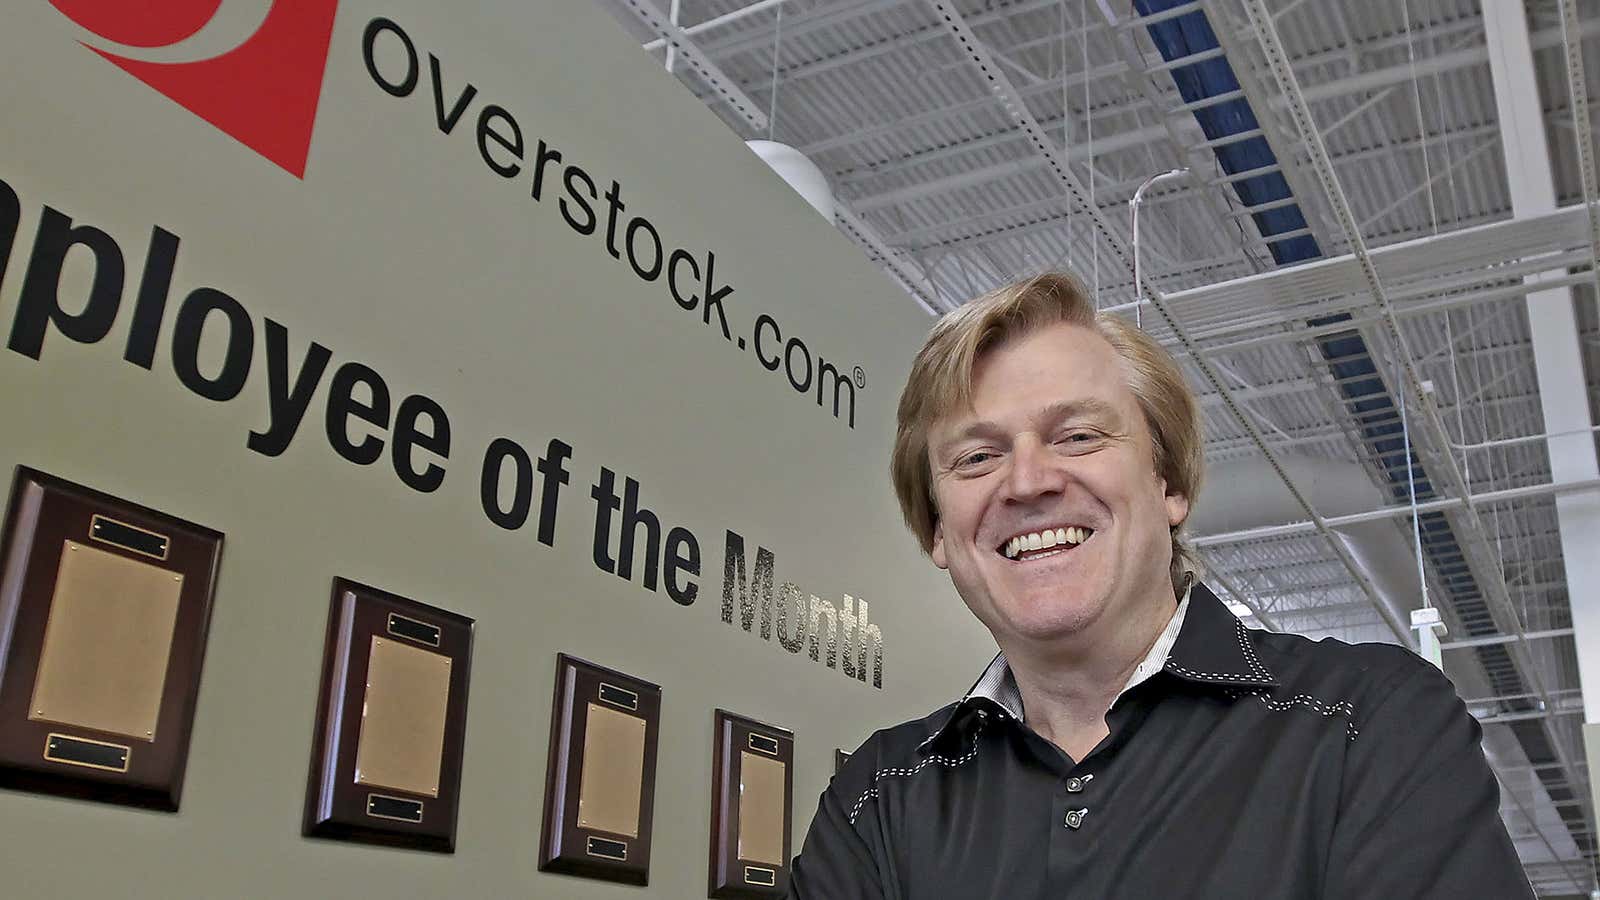 Patrick Byrne is ICO issuer of the month.